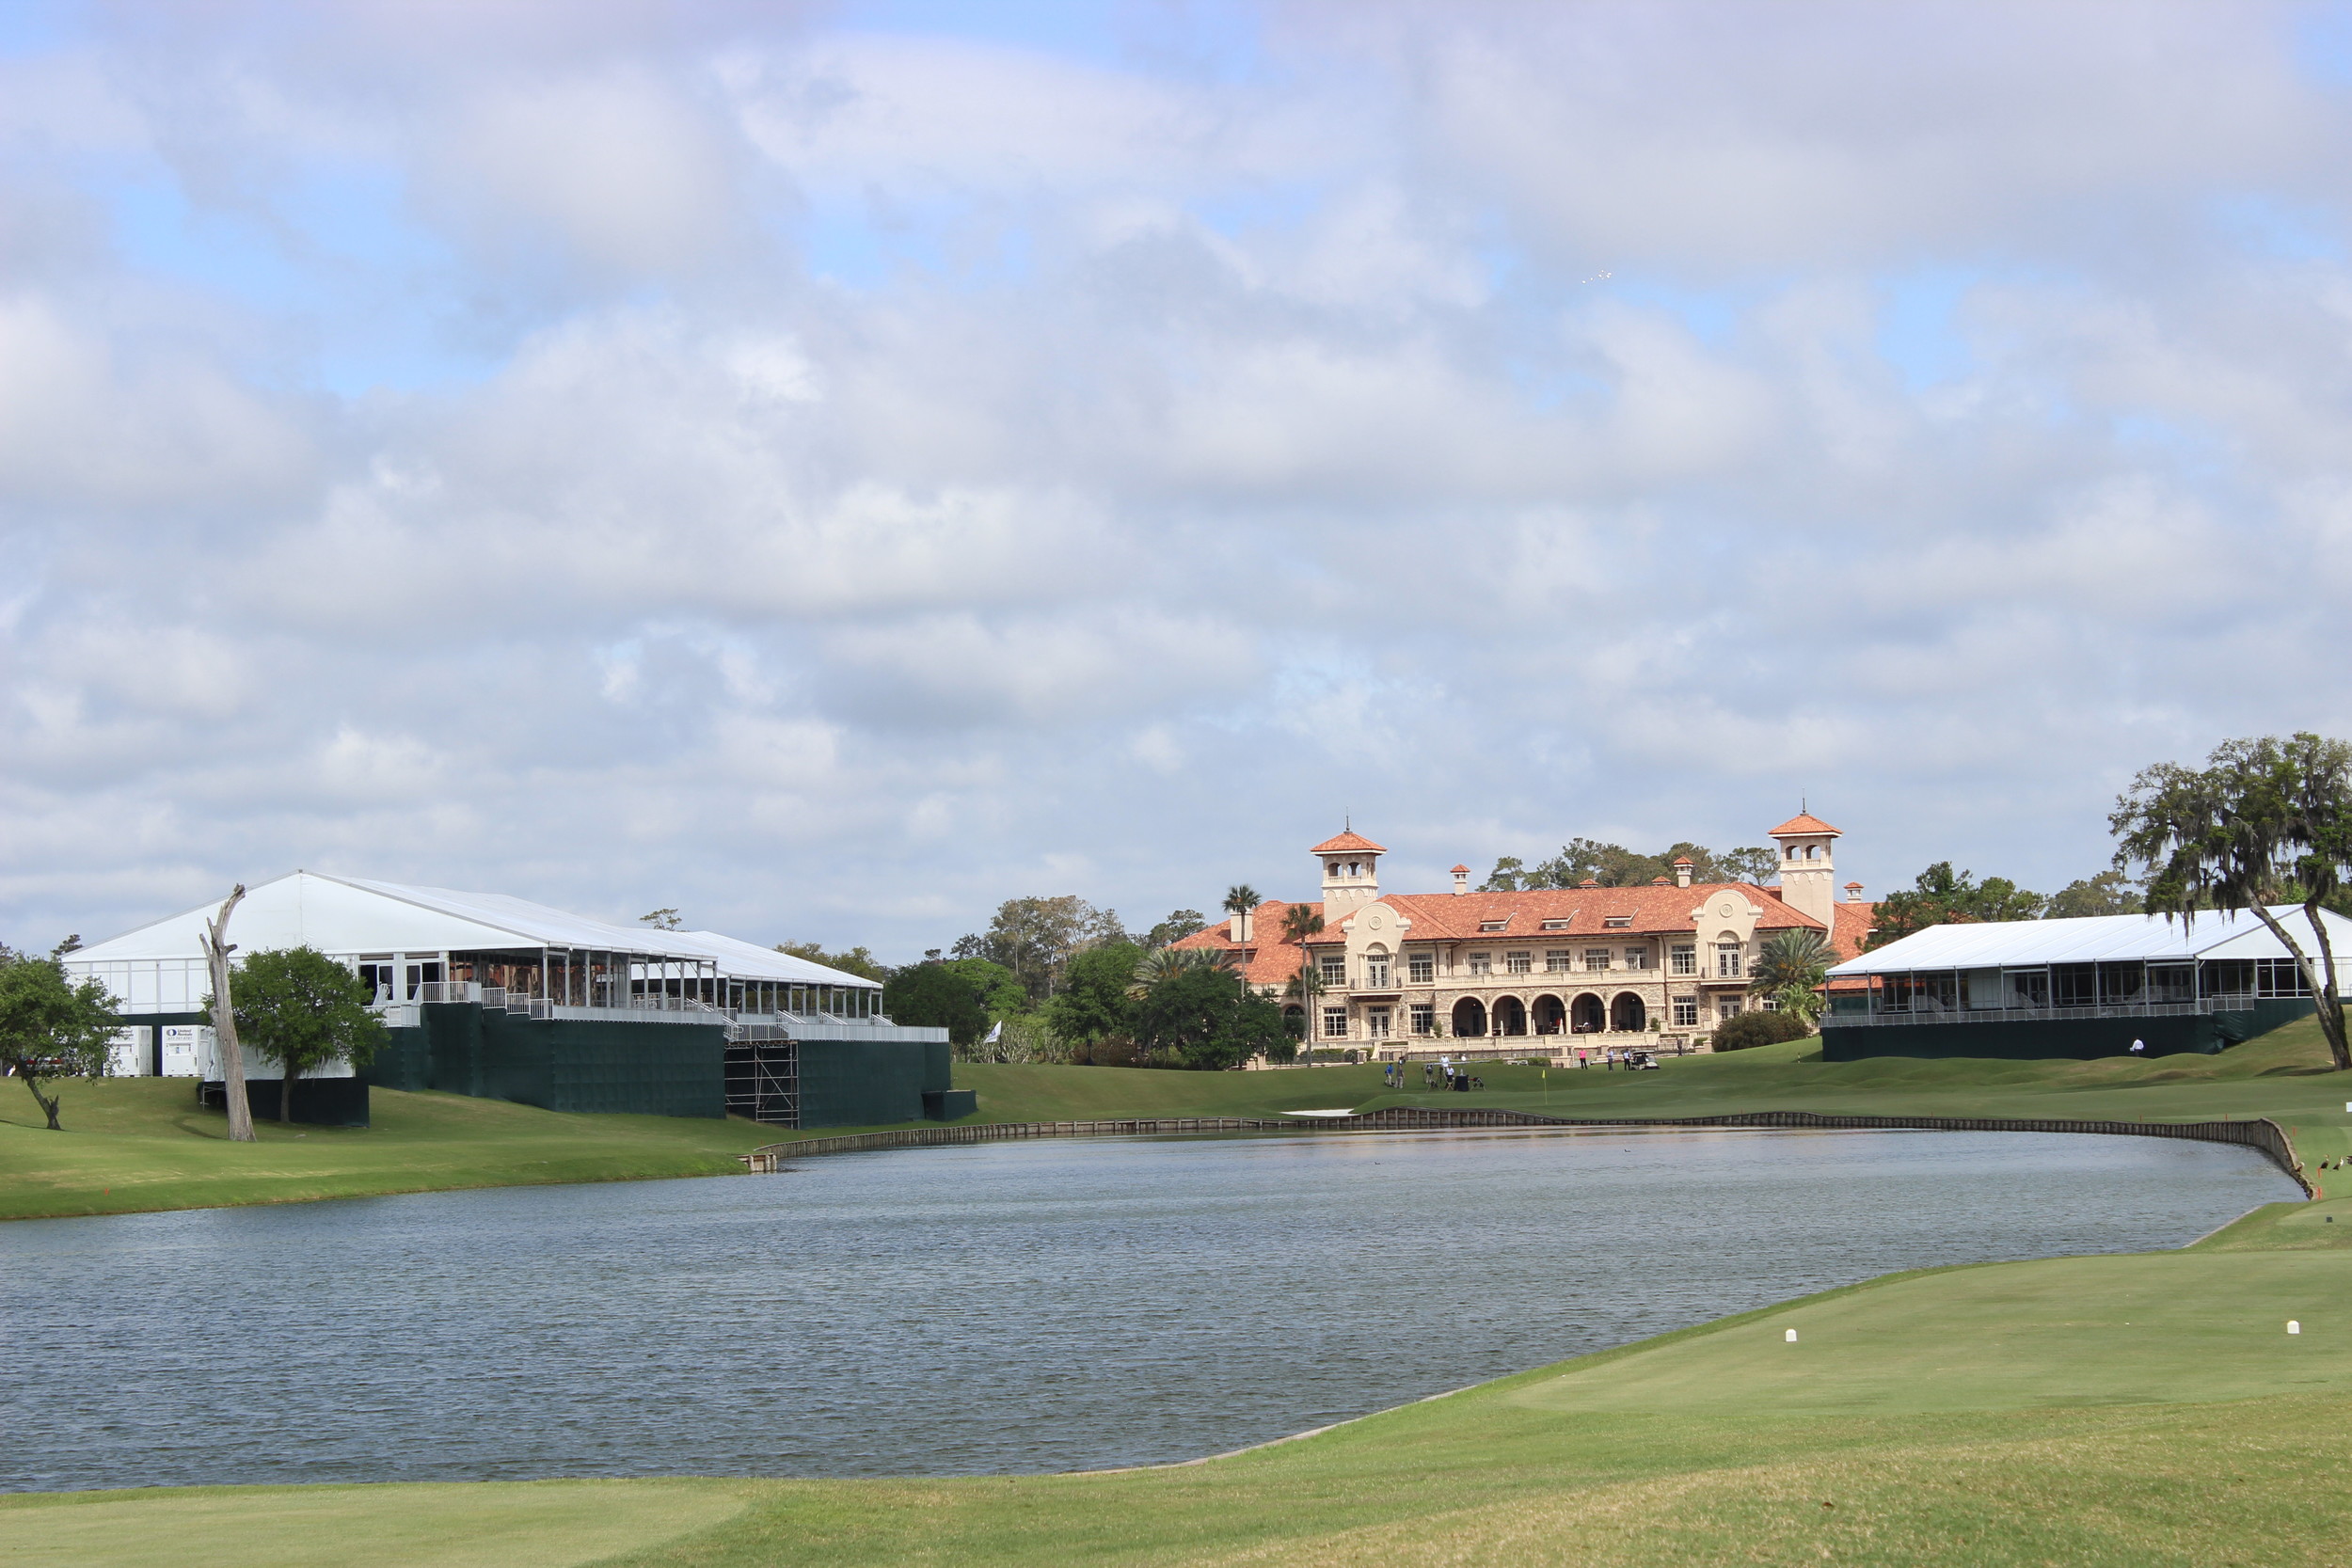 TPC Sawgrass gears up for THE PLAYERS